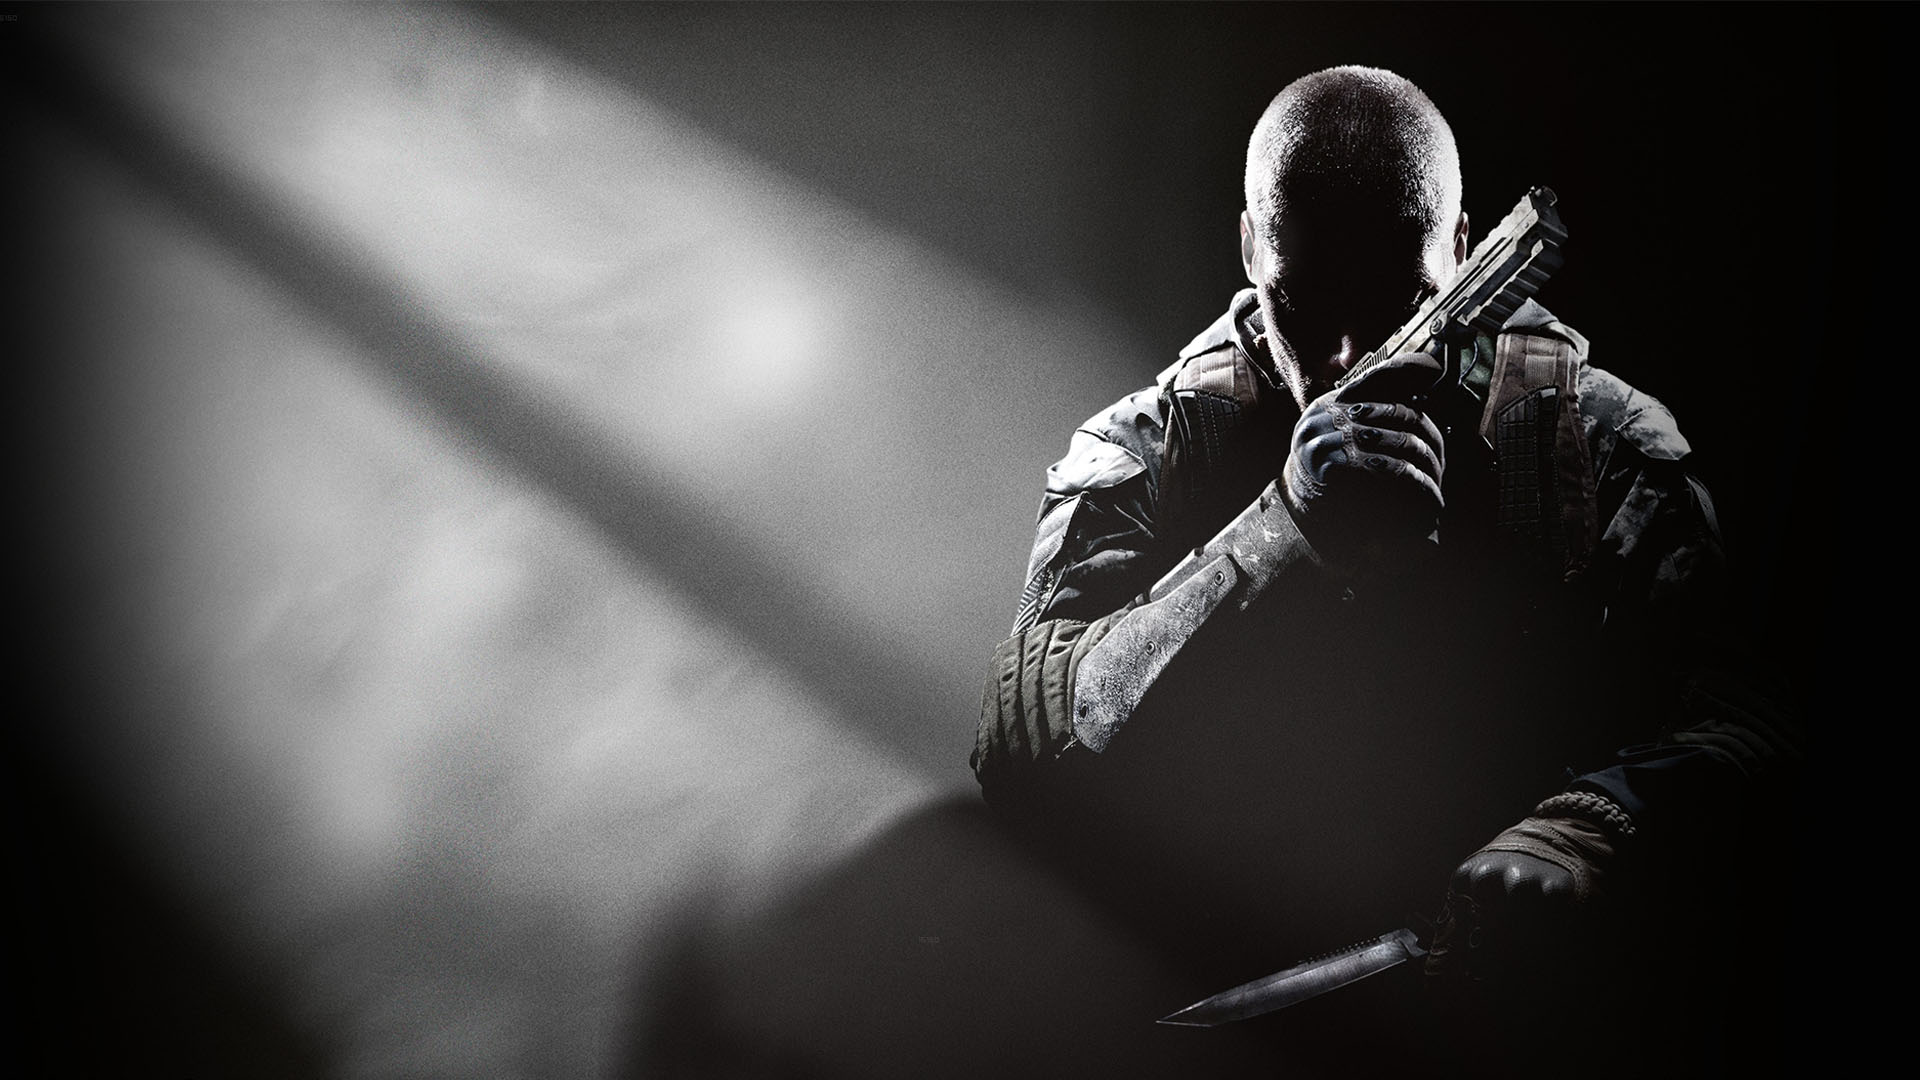 Free photo The guy in the shadows in Call Of Duty: Black Ops.